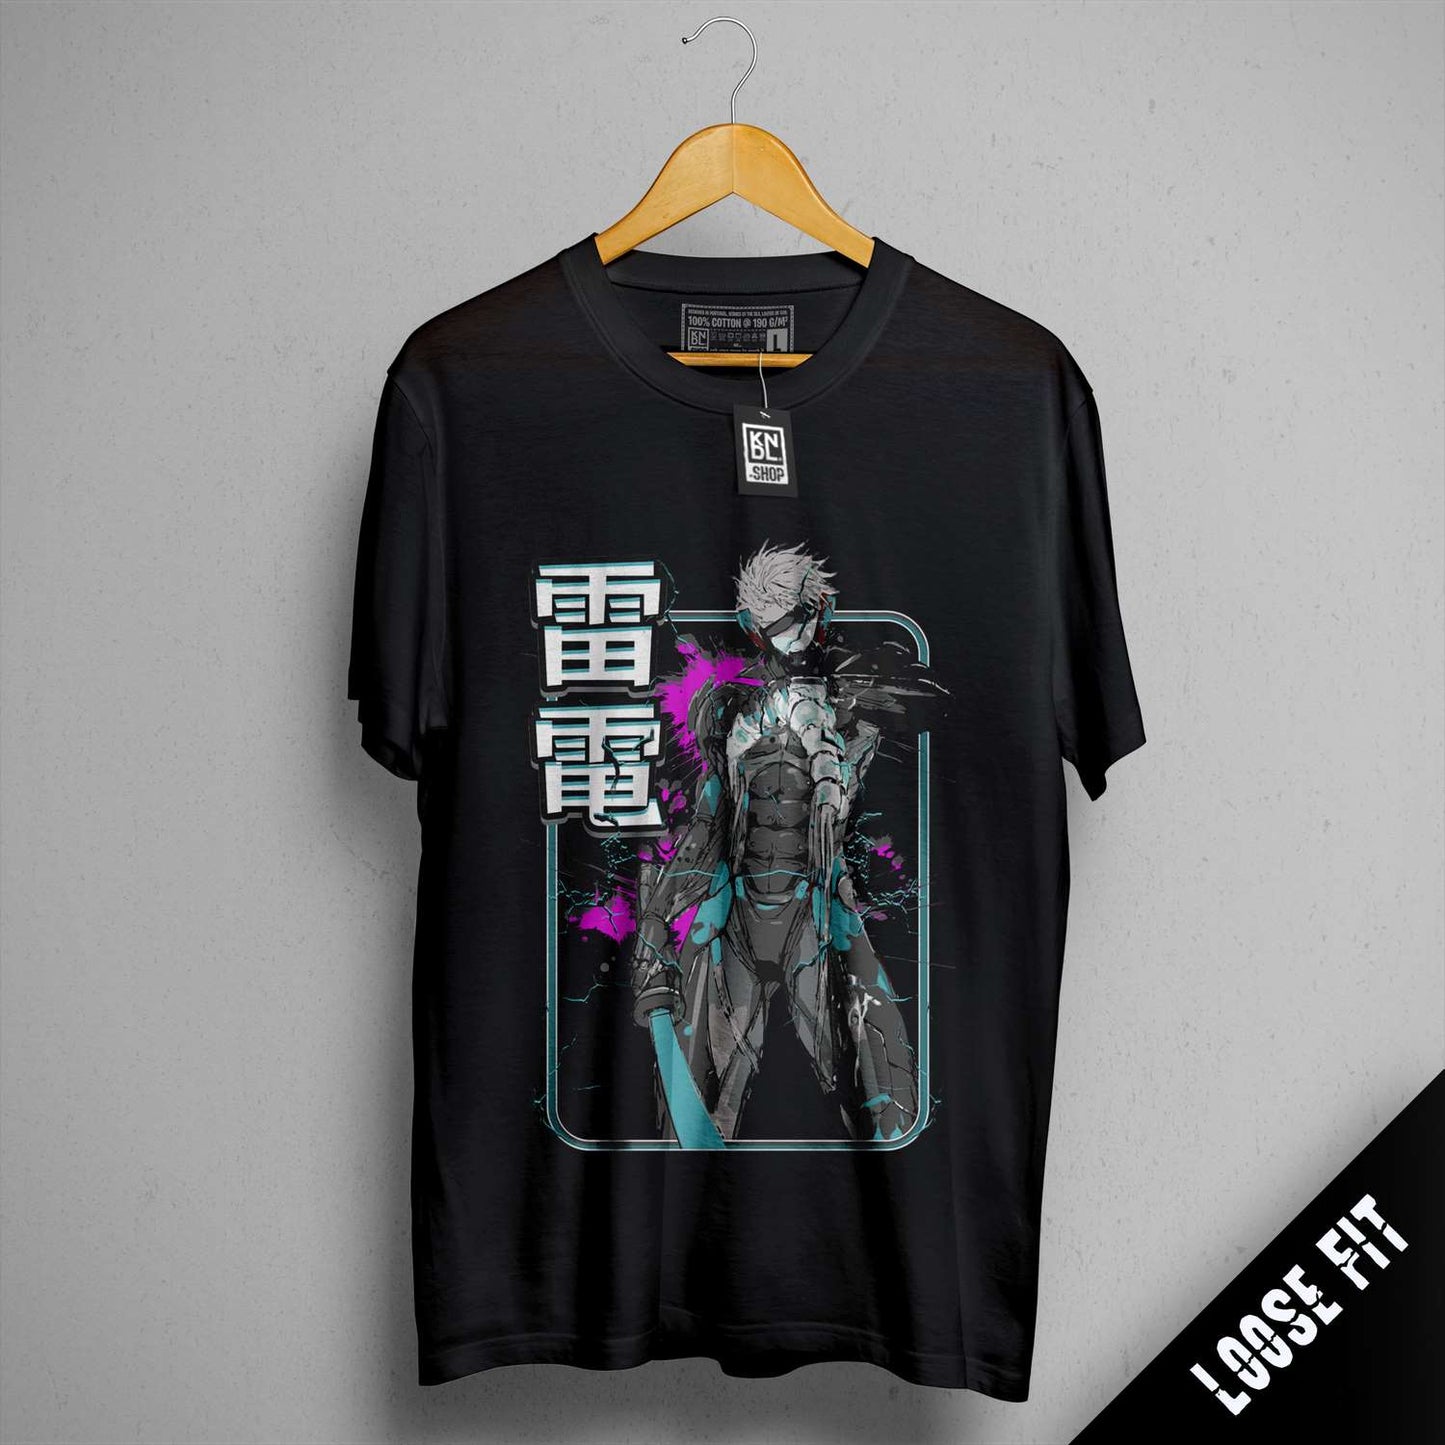 a black t - shirt with a picture of an anime character on it